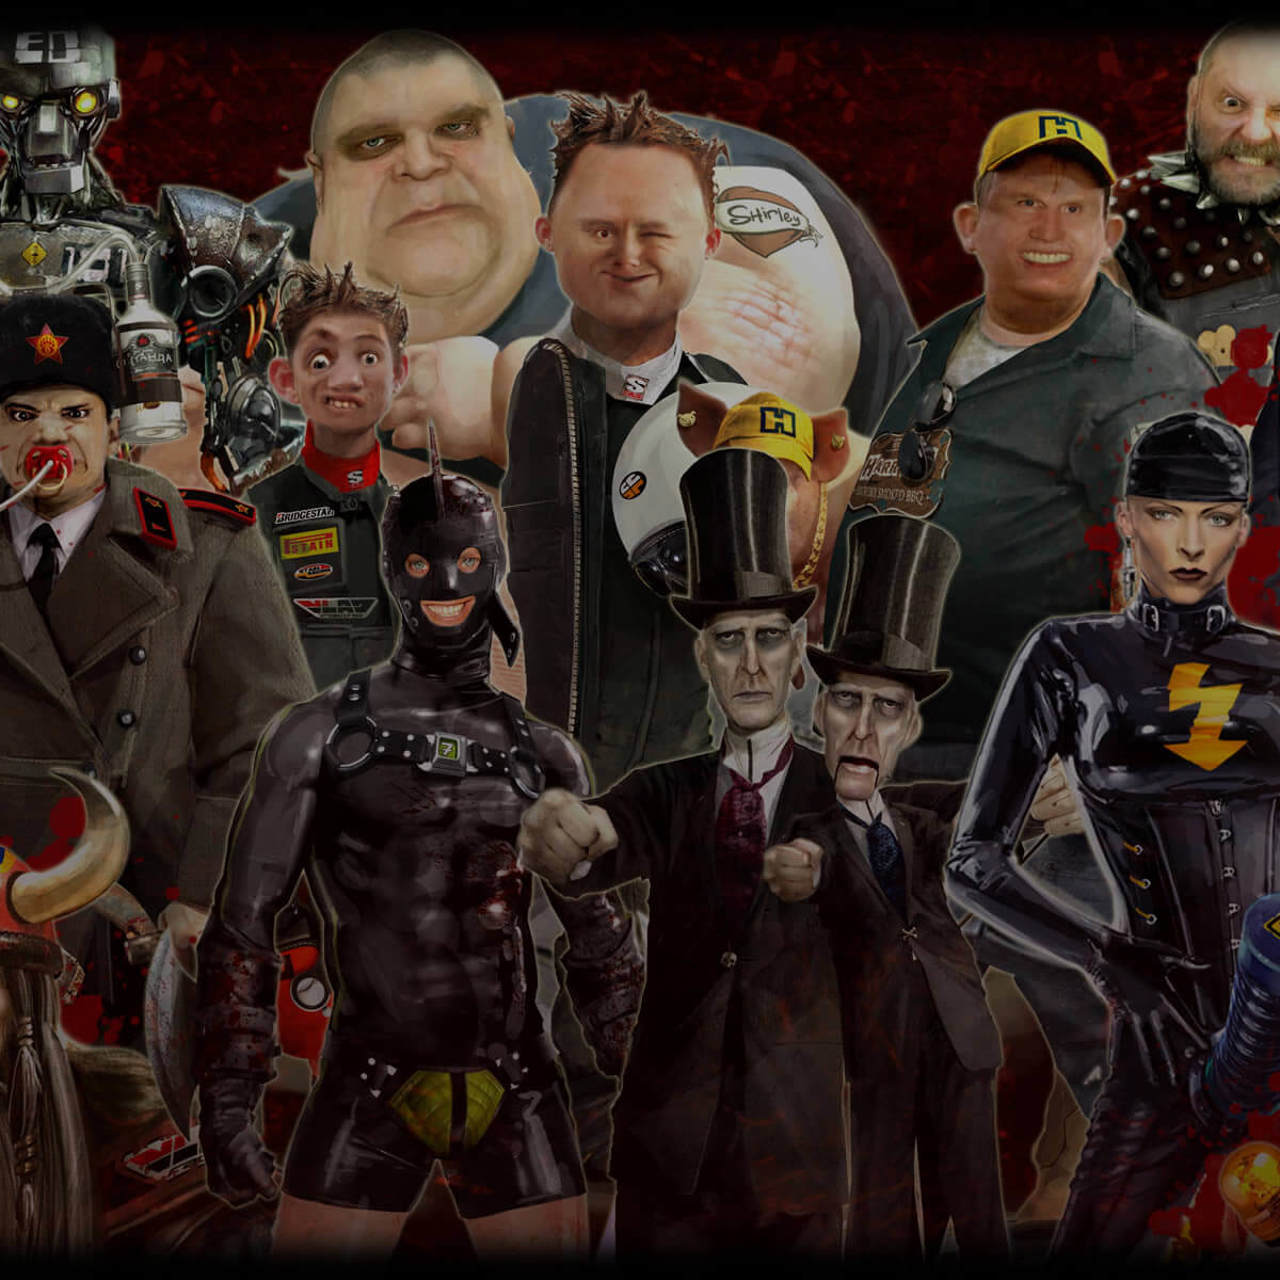 Image mashup of a variety of characters from the carmageddon game series